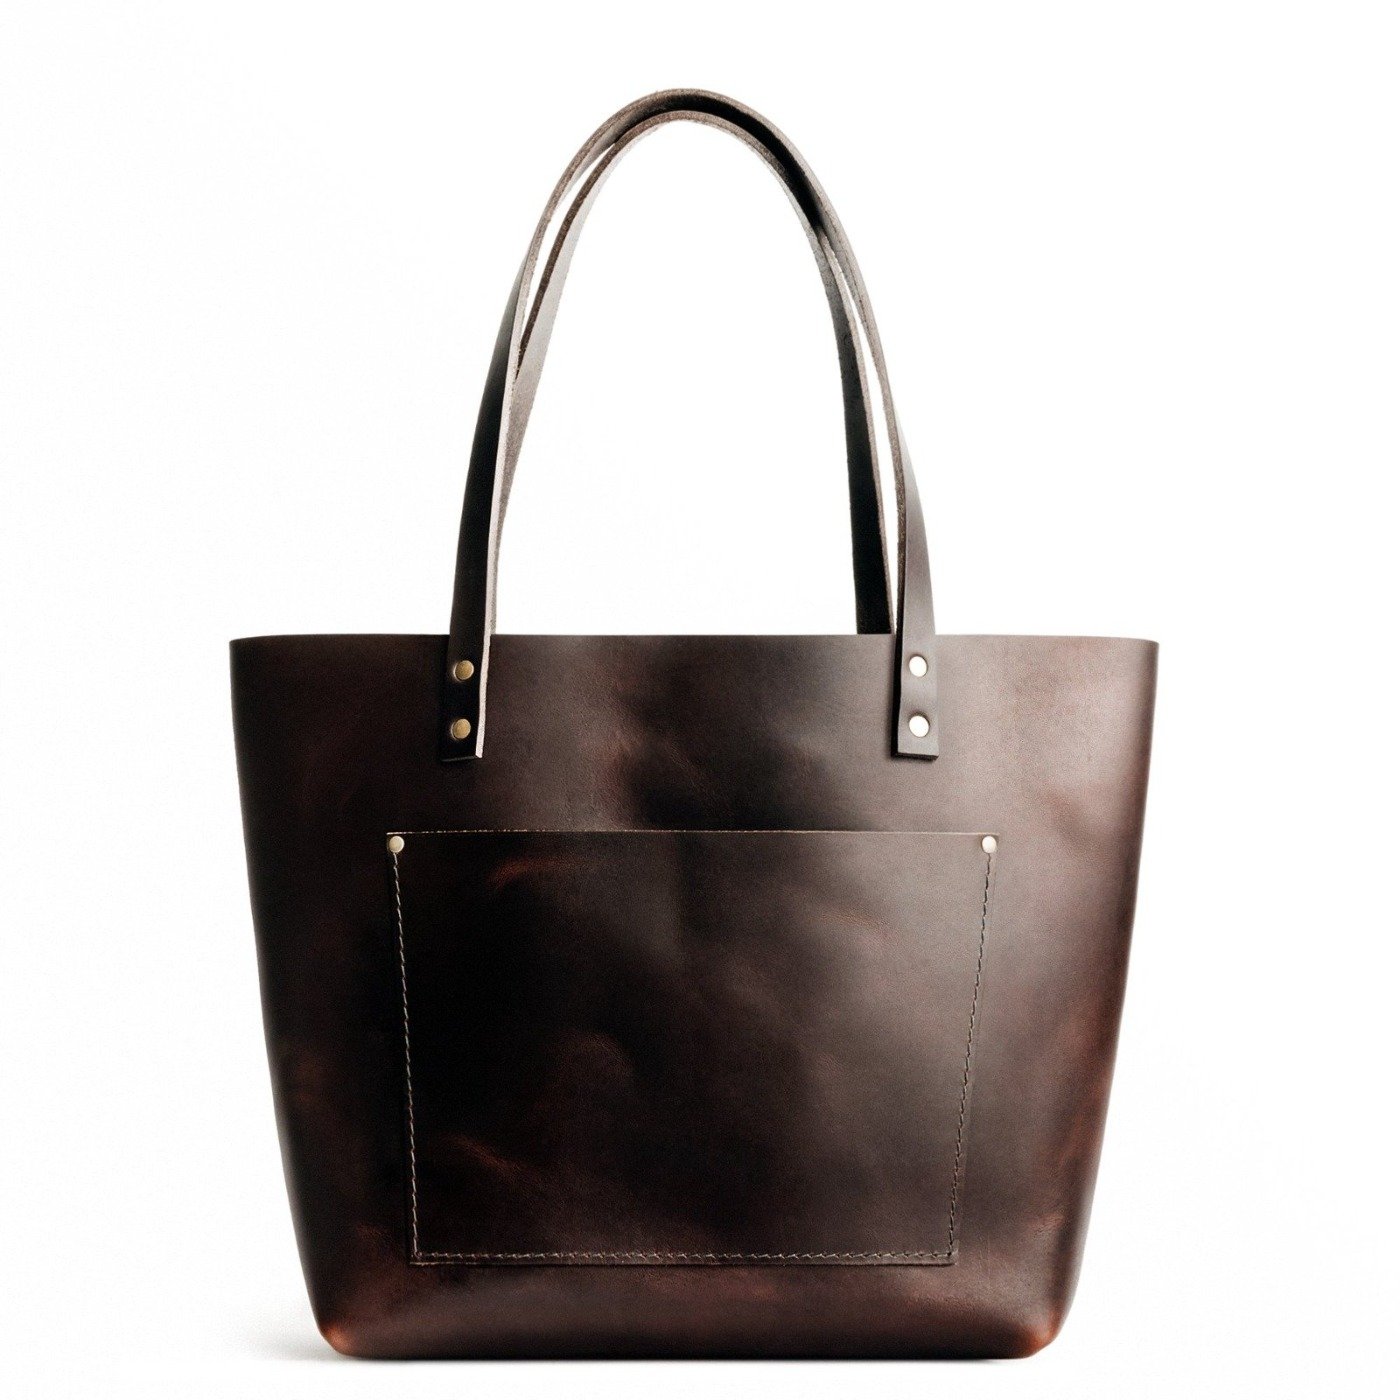 [Deleted] 'Almost Perfect' Leather Tote Bag - $65.00 | Portland Leather ...